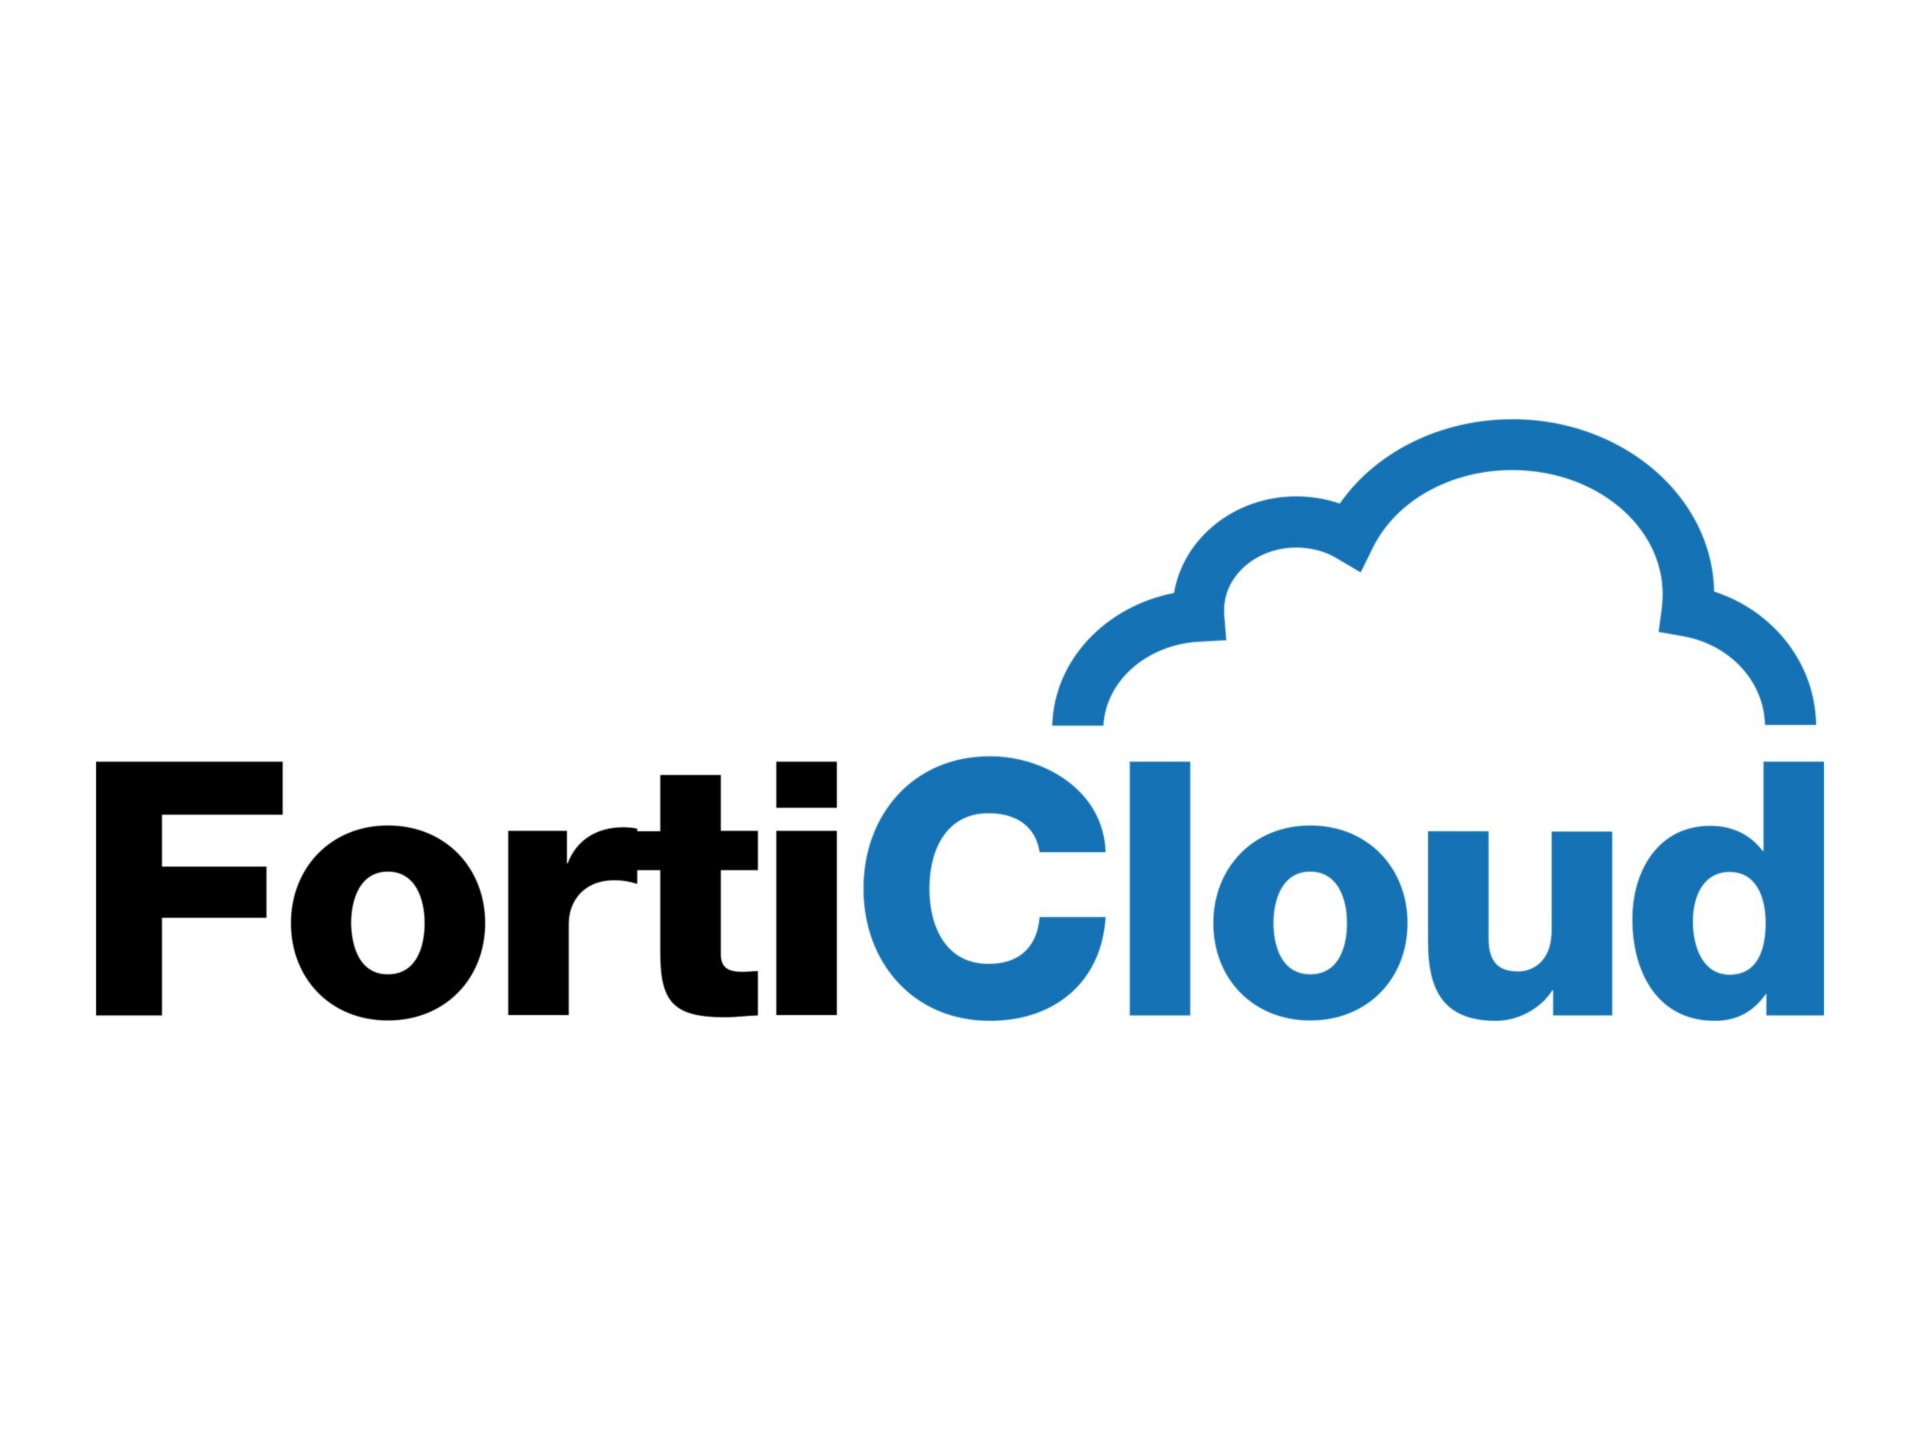 FortiToken Cloud - subscription license (1 year) + FortiCare 24x7 - up to 25 users, 2500 SMS messages